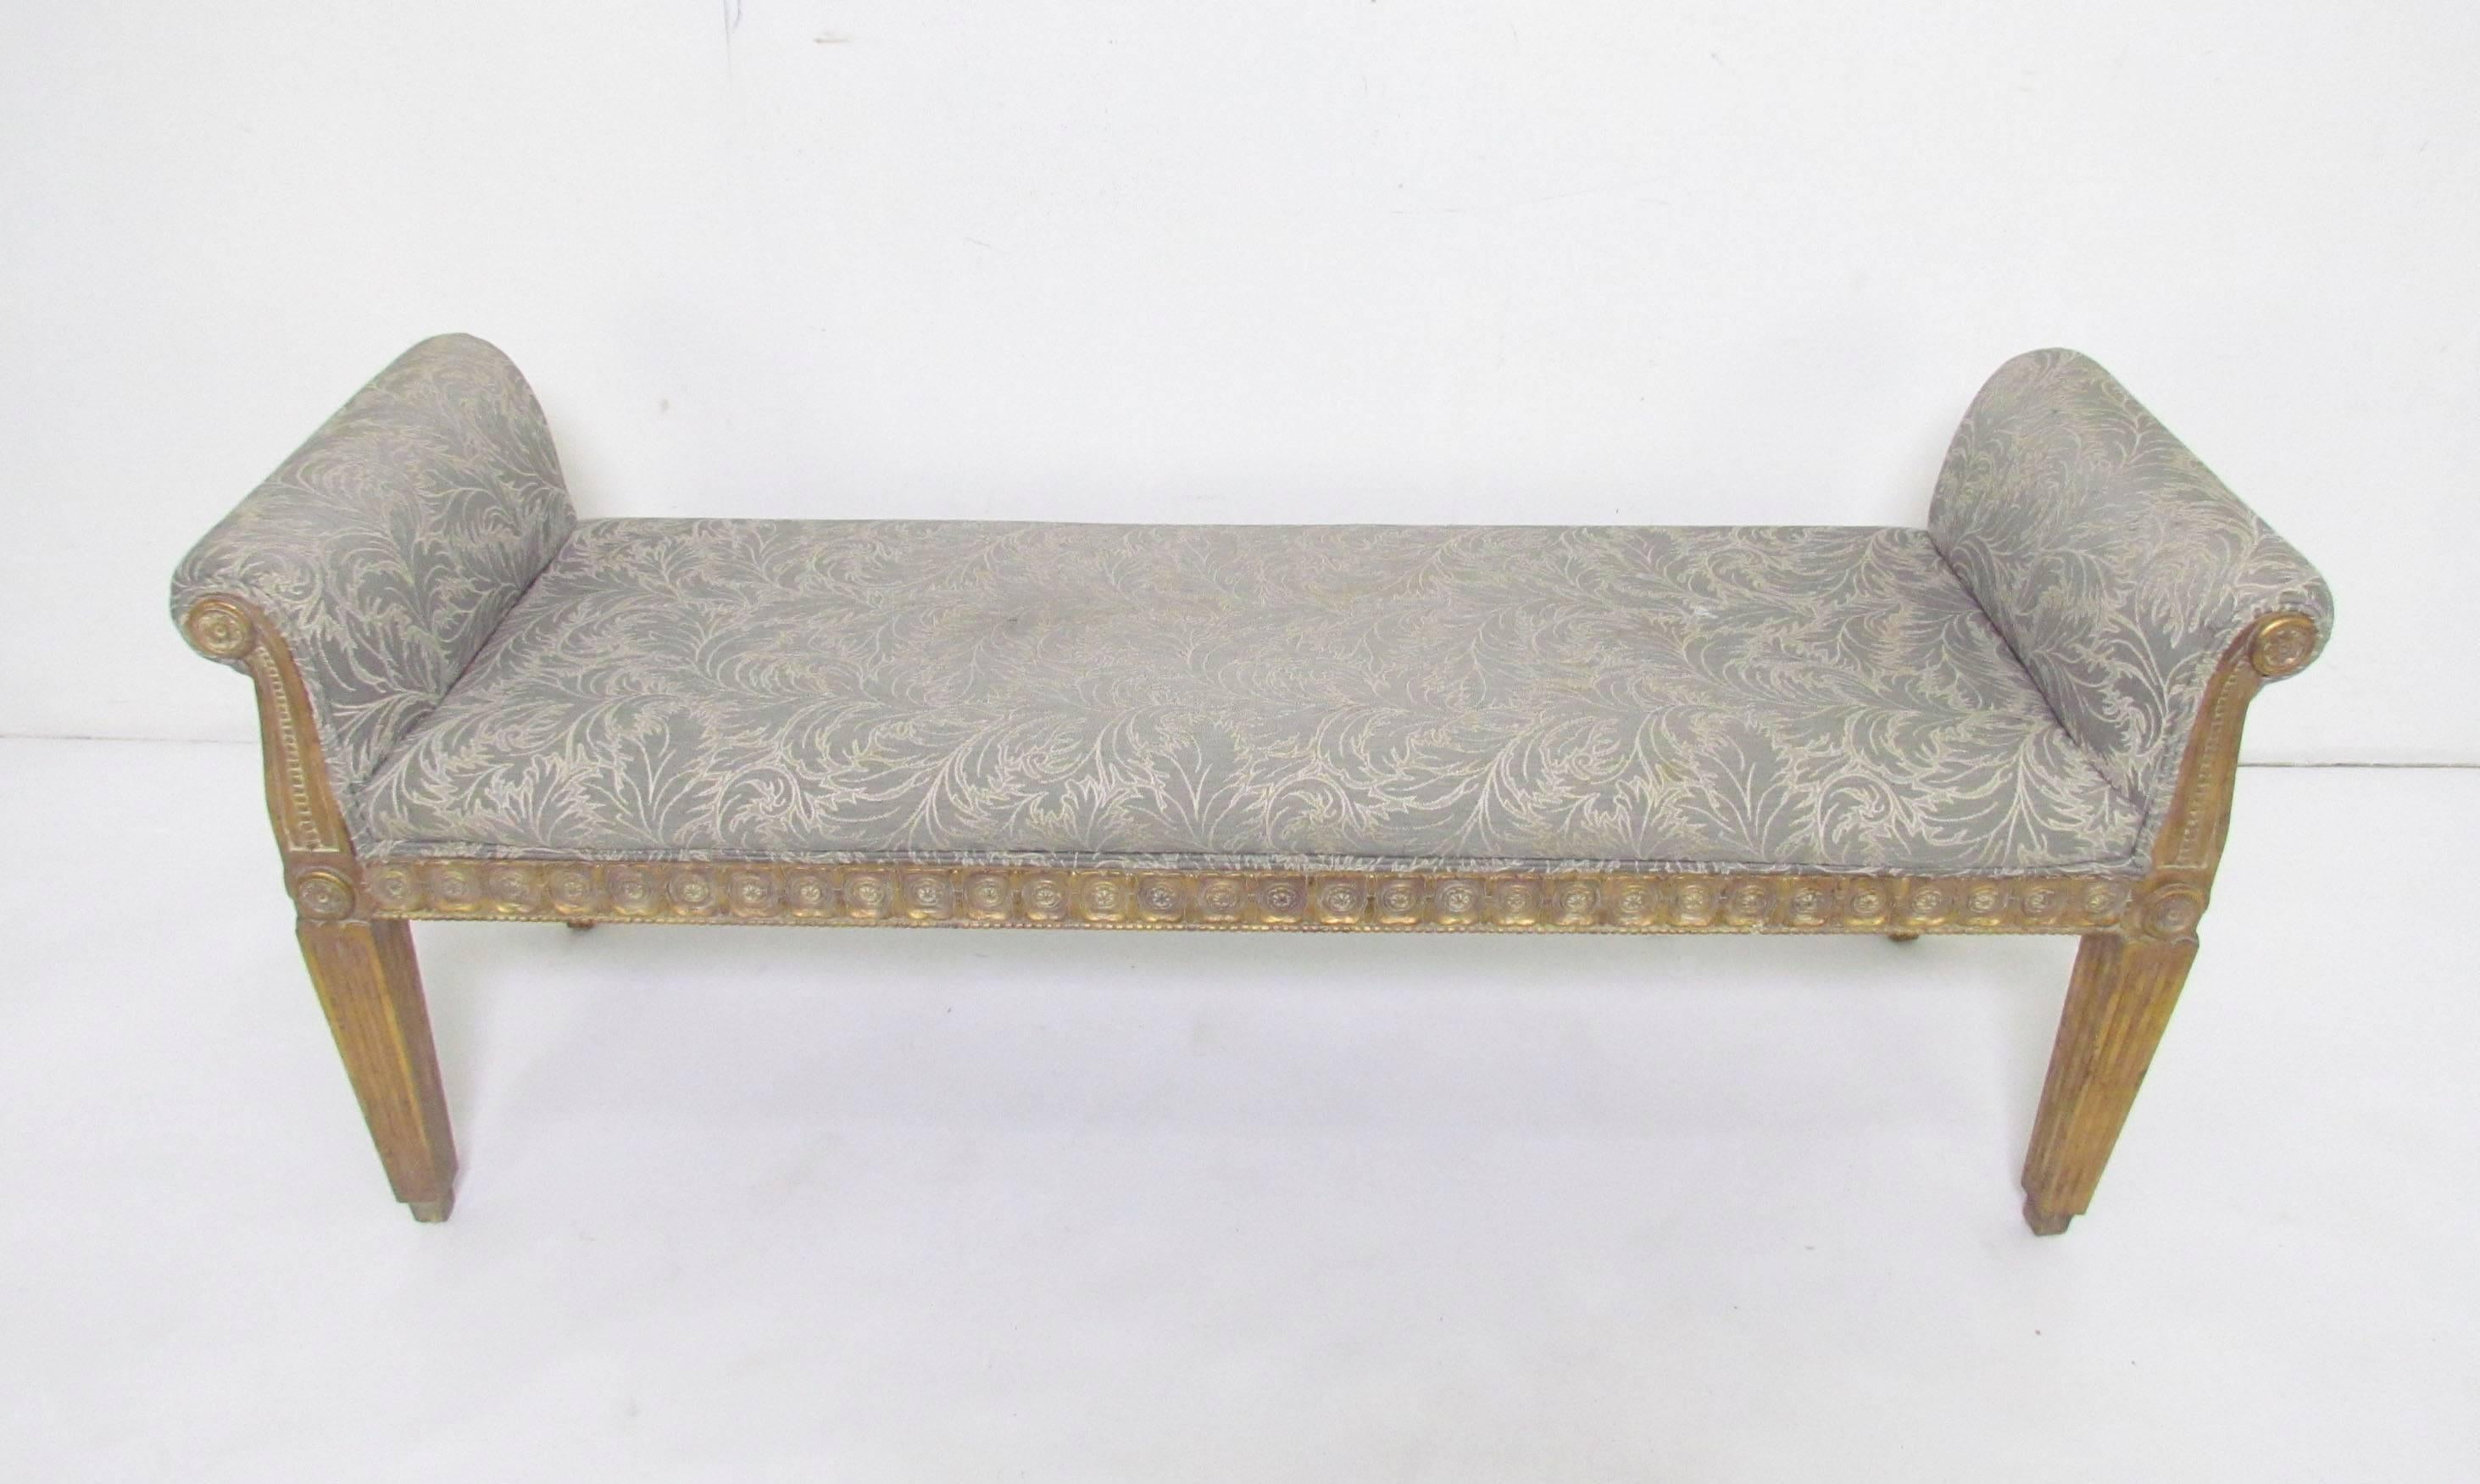 Neoclassical Style Bench Carved Giltwood Frame by Meyer Gunther Martini 1